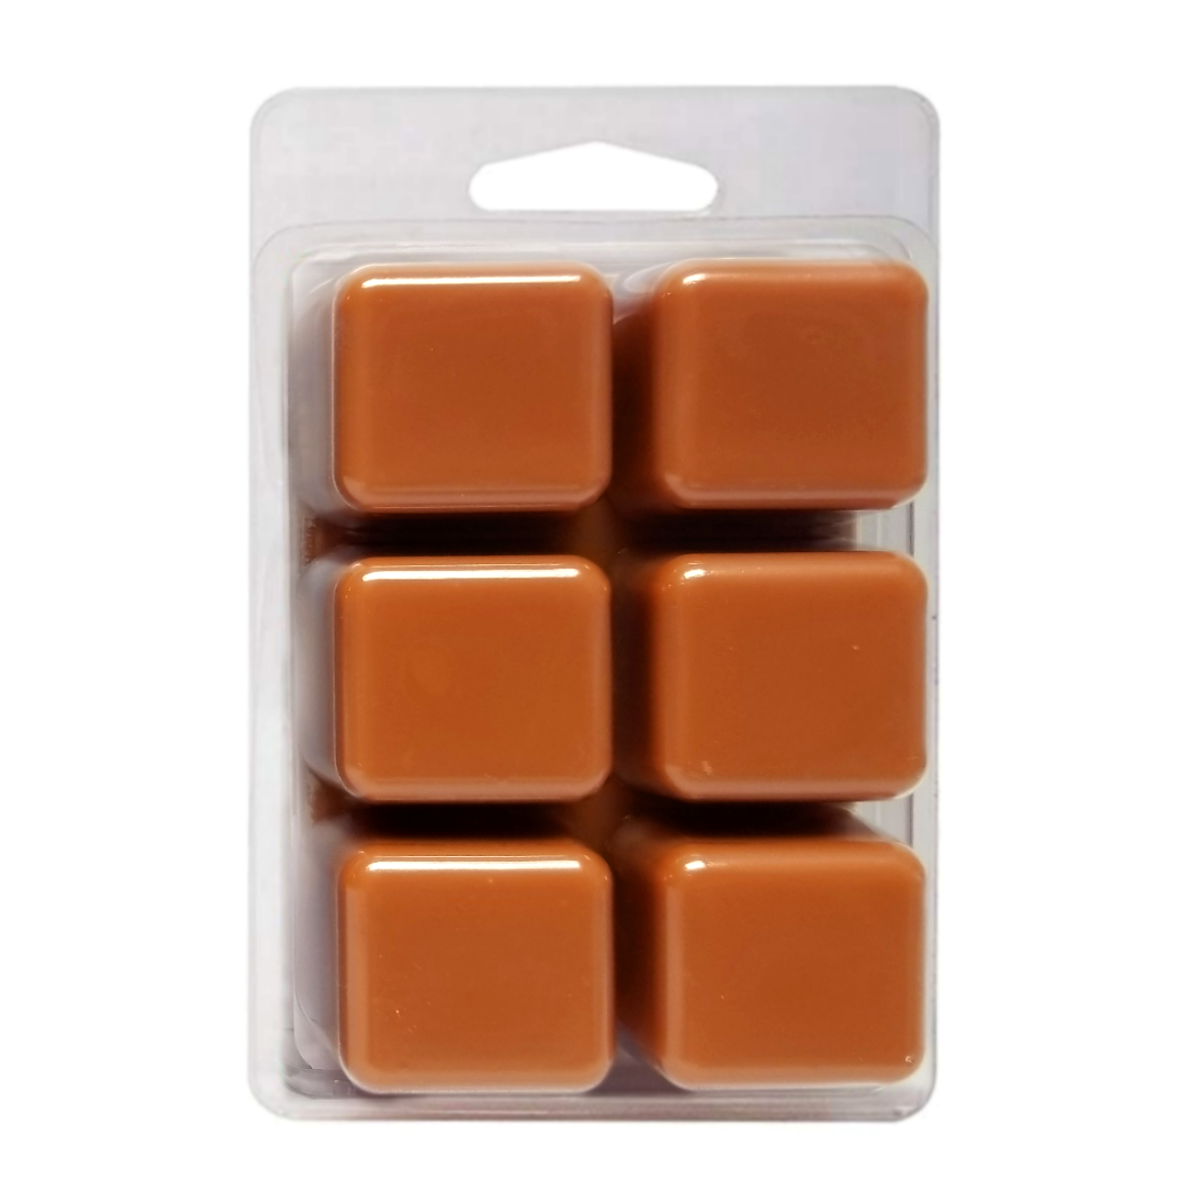 Peanut Butter Cups - 3.2 oz Clamshell